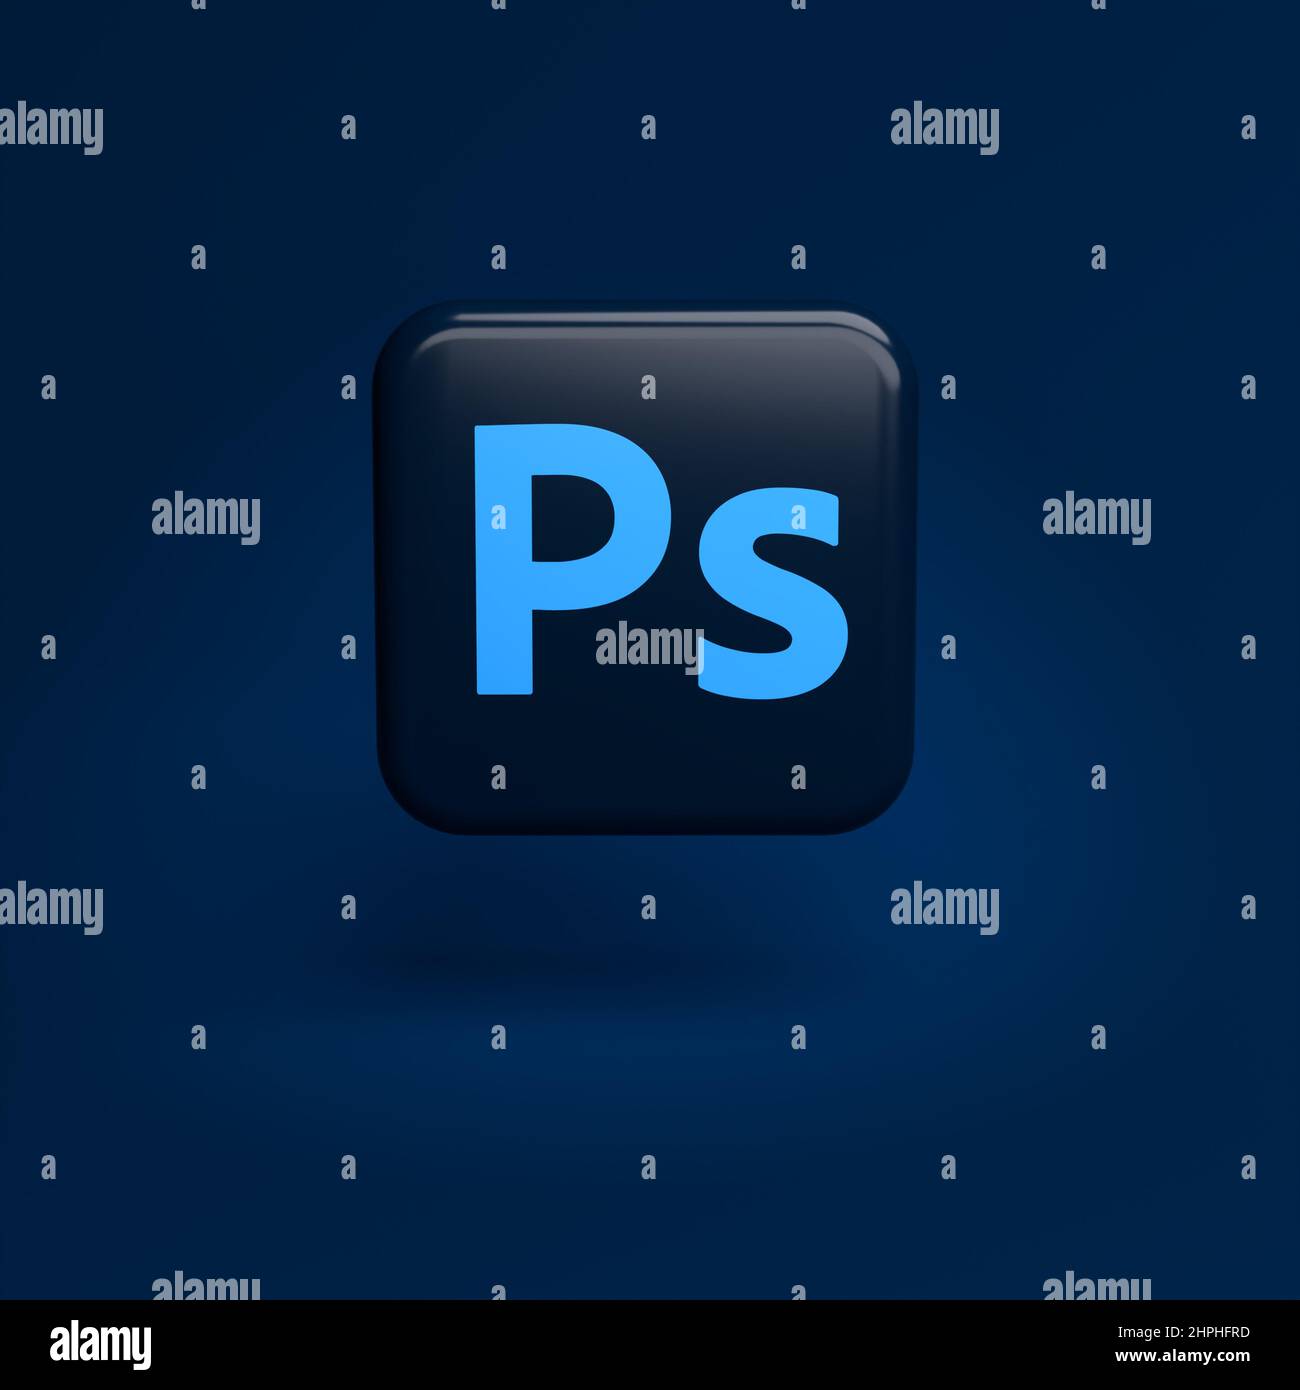 Logo of the photo and image editing software program Adobe Photoshop - major part of the Creative Cloud Apps Suite on a tile hovering over a seamless Stock Photo